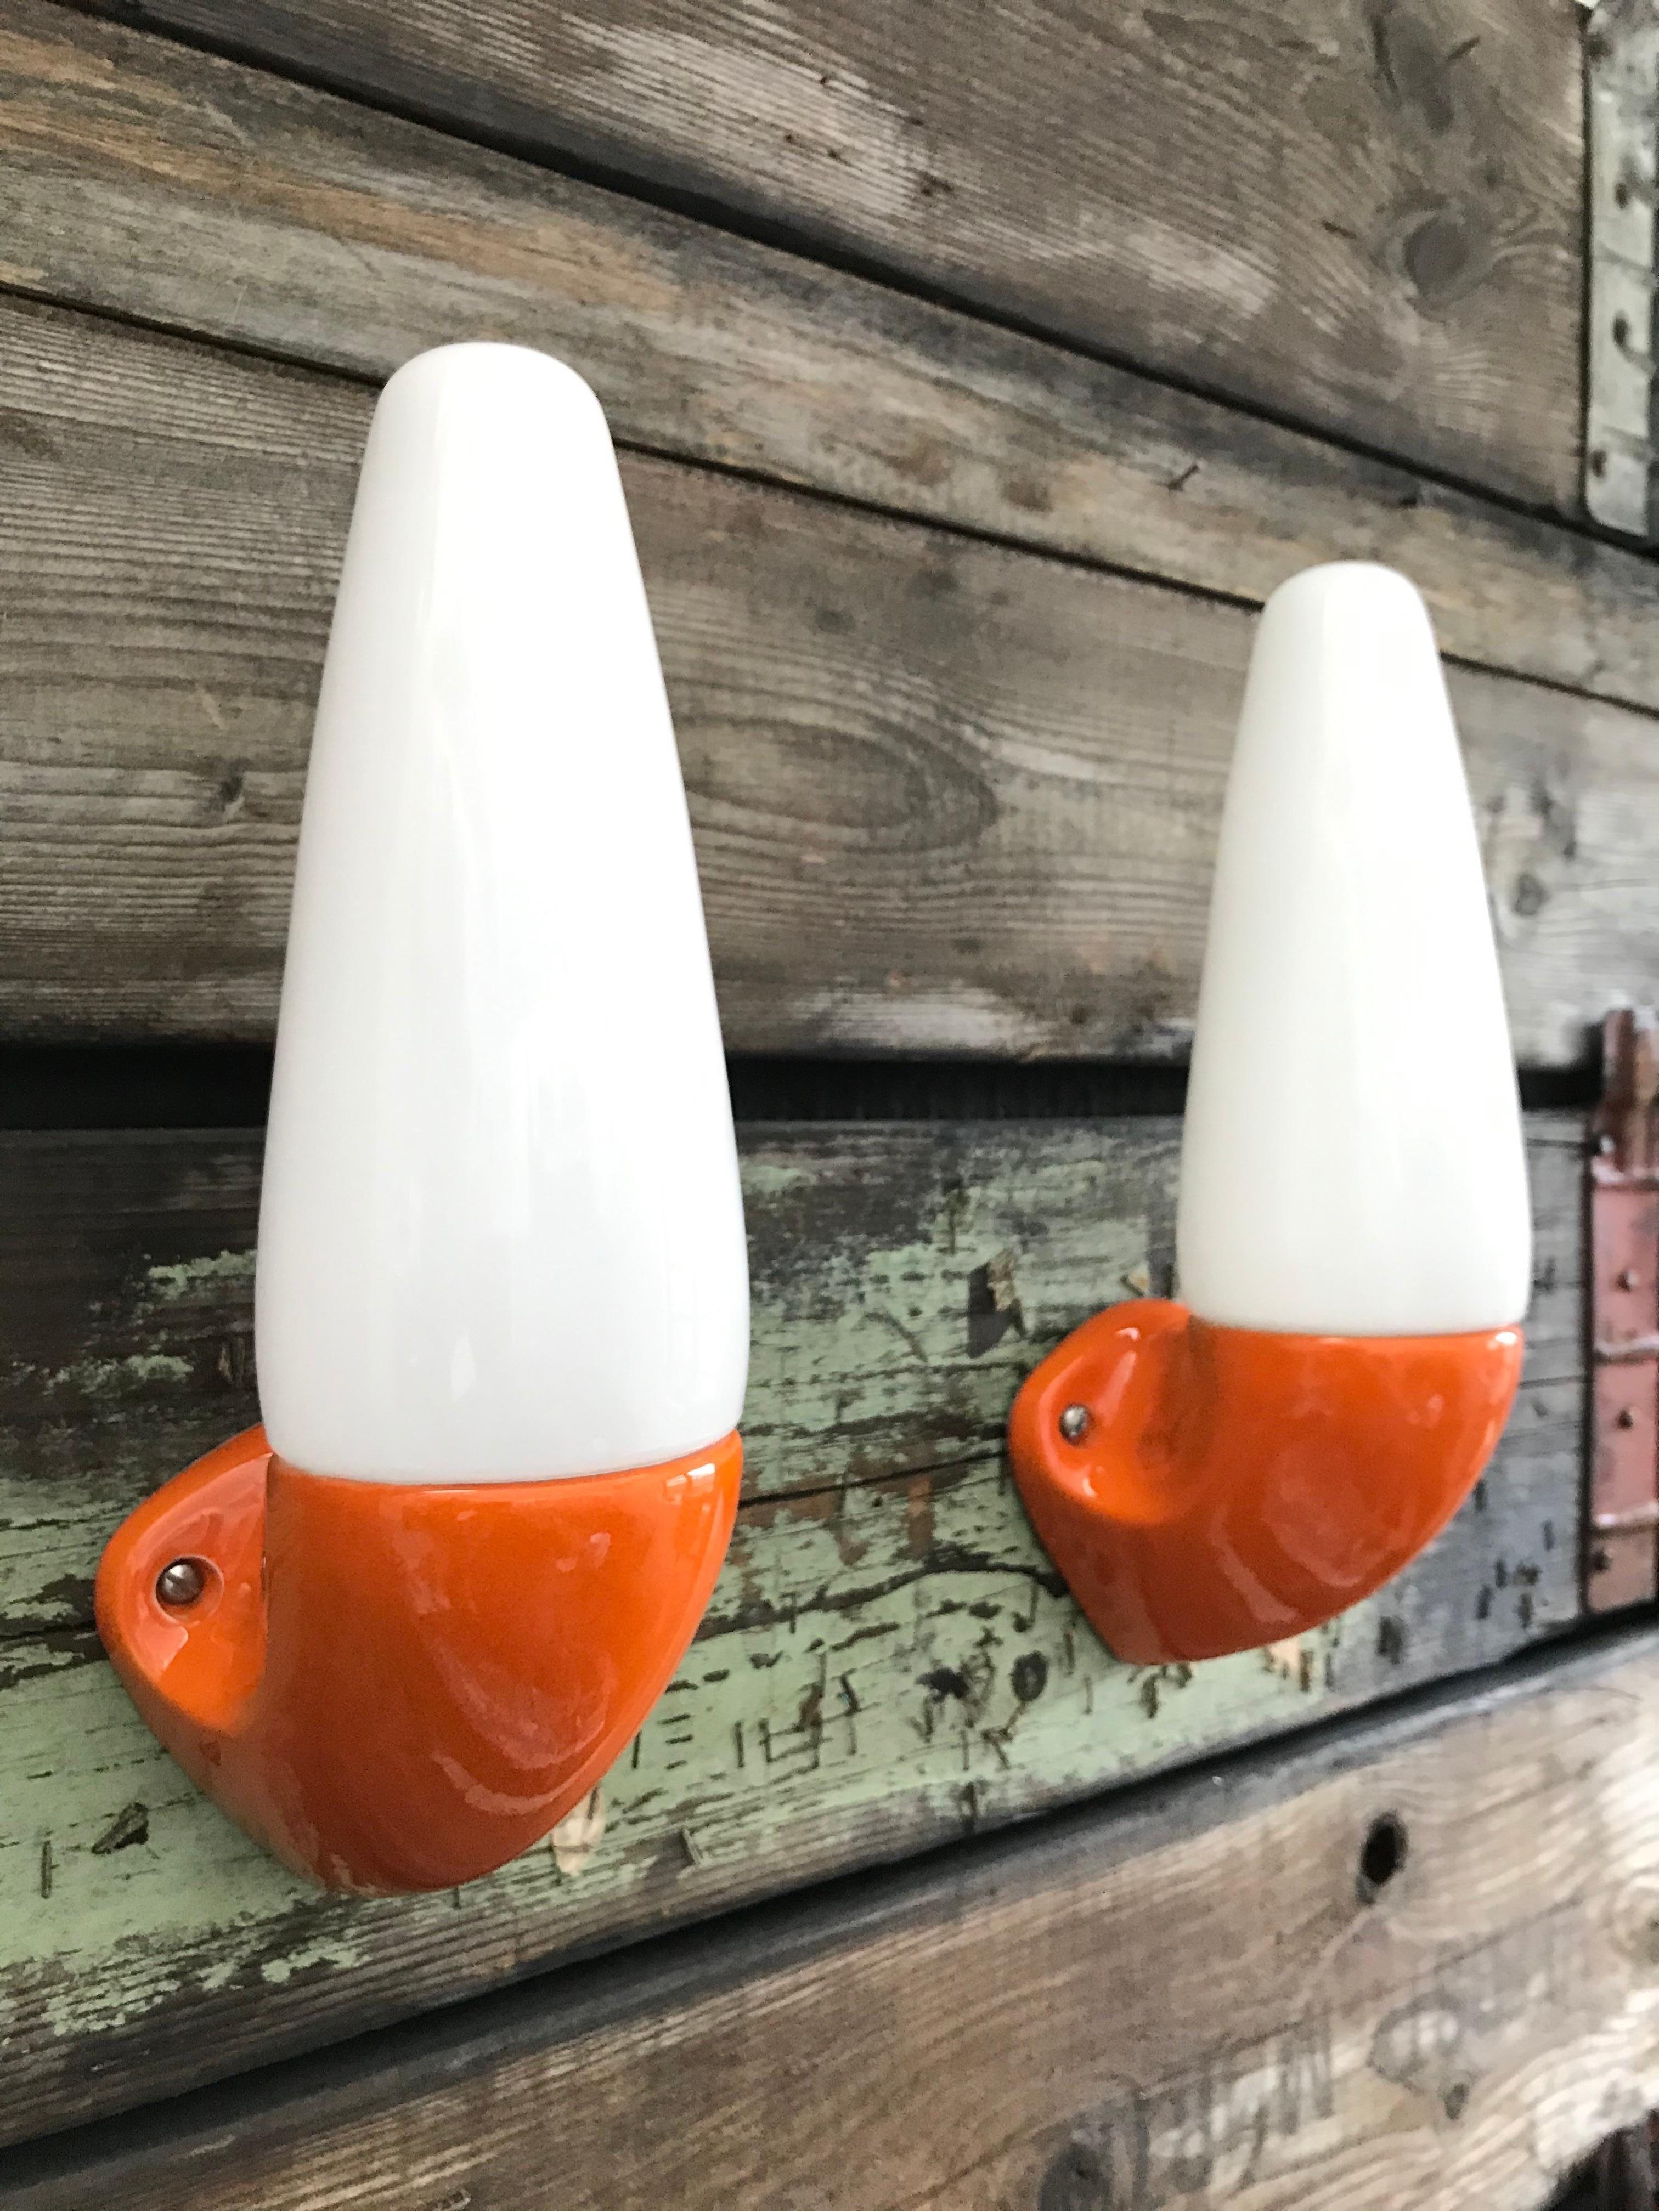 A pair of vintage orange Ifö of Sweden ceramic bathroom lamps model 6035 from the 1960s.
Designed by Sigvard Bernadotte. 
Opaline glass shades. 
Ceramic bulb holders for an E14 bulb
Lamps can be used as up or down lights.
In great condition and